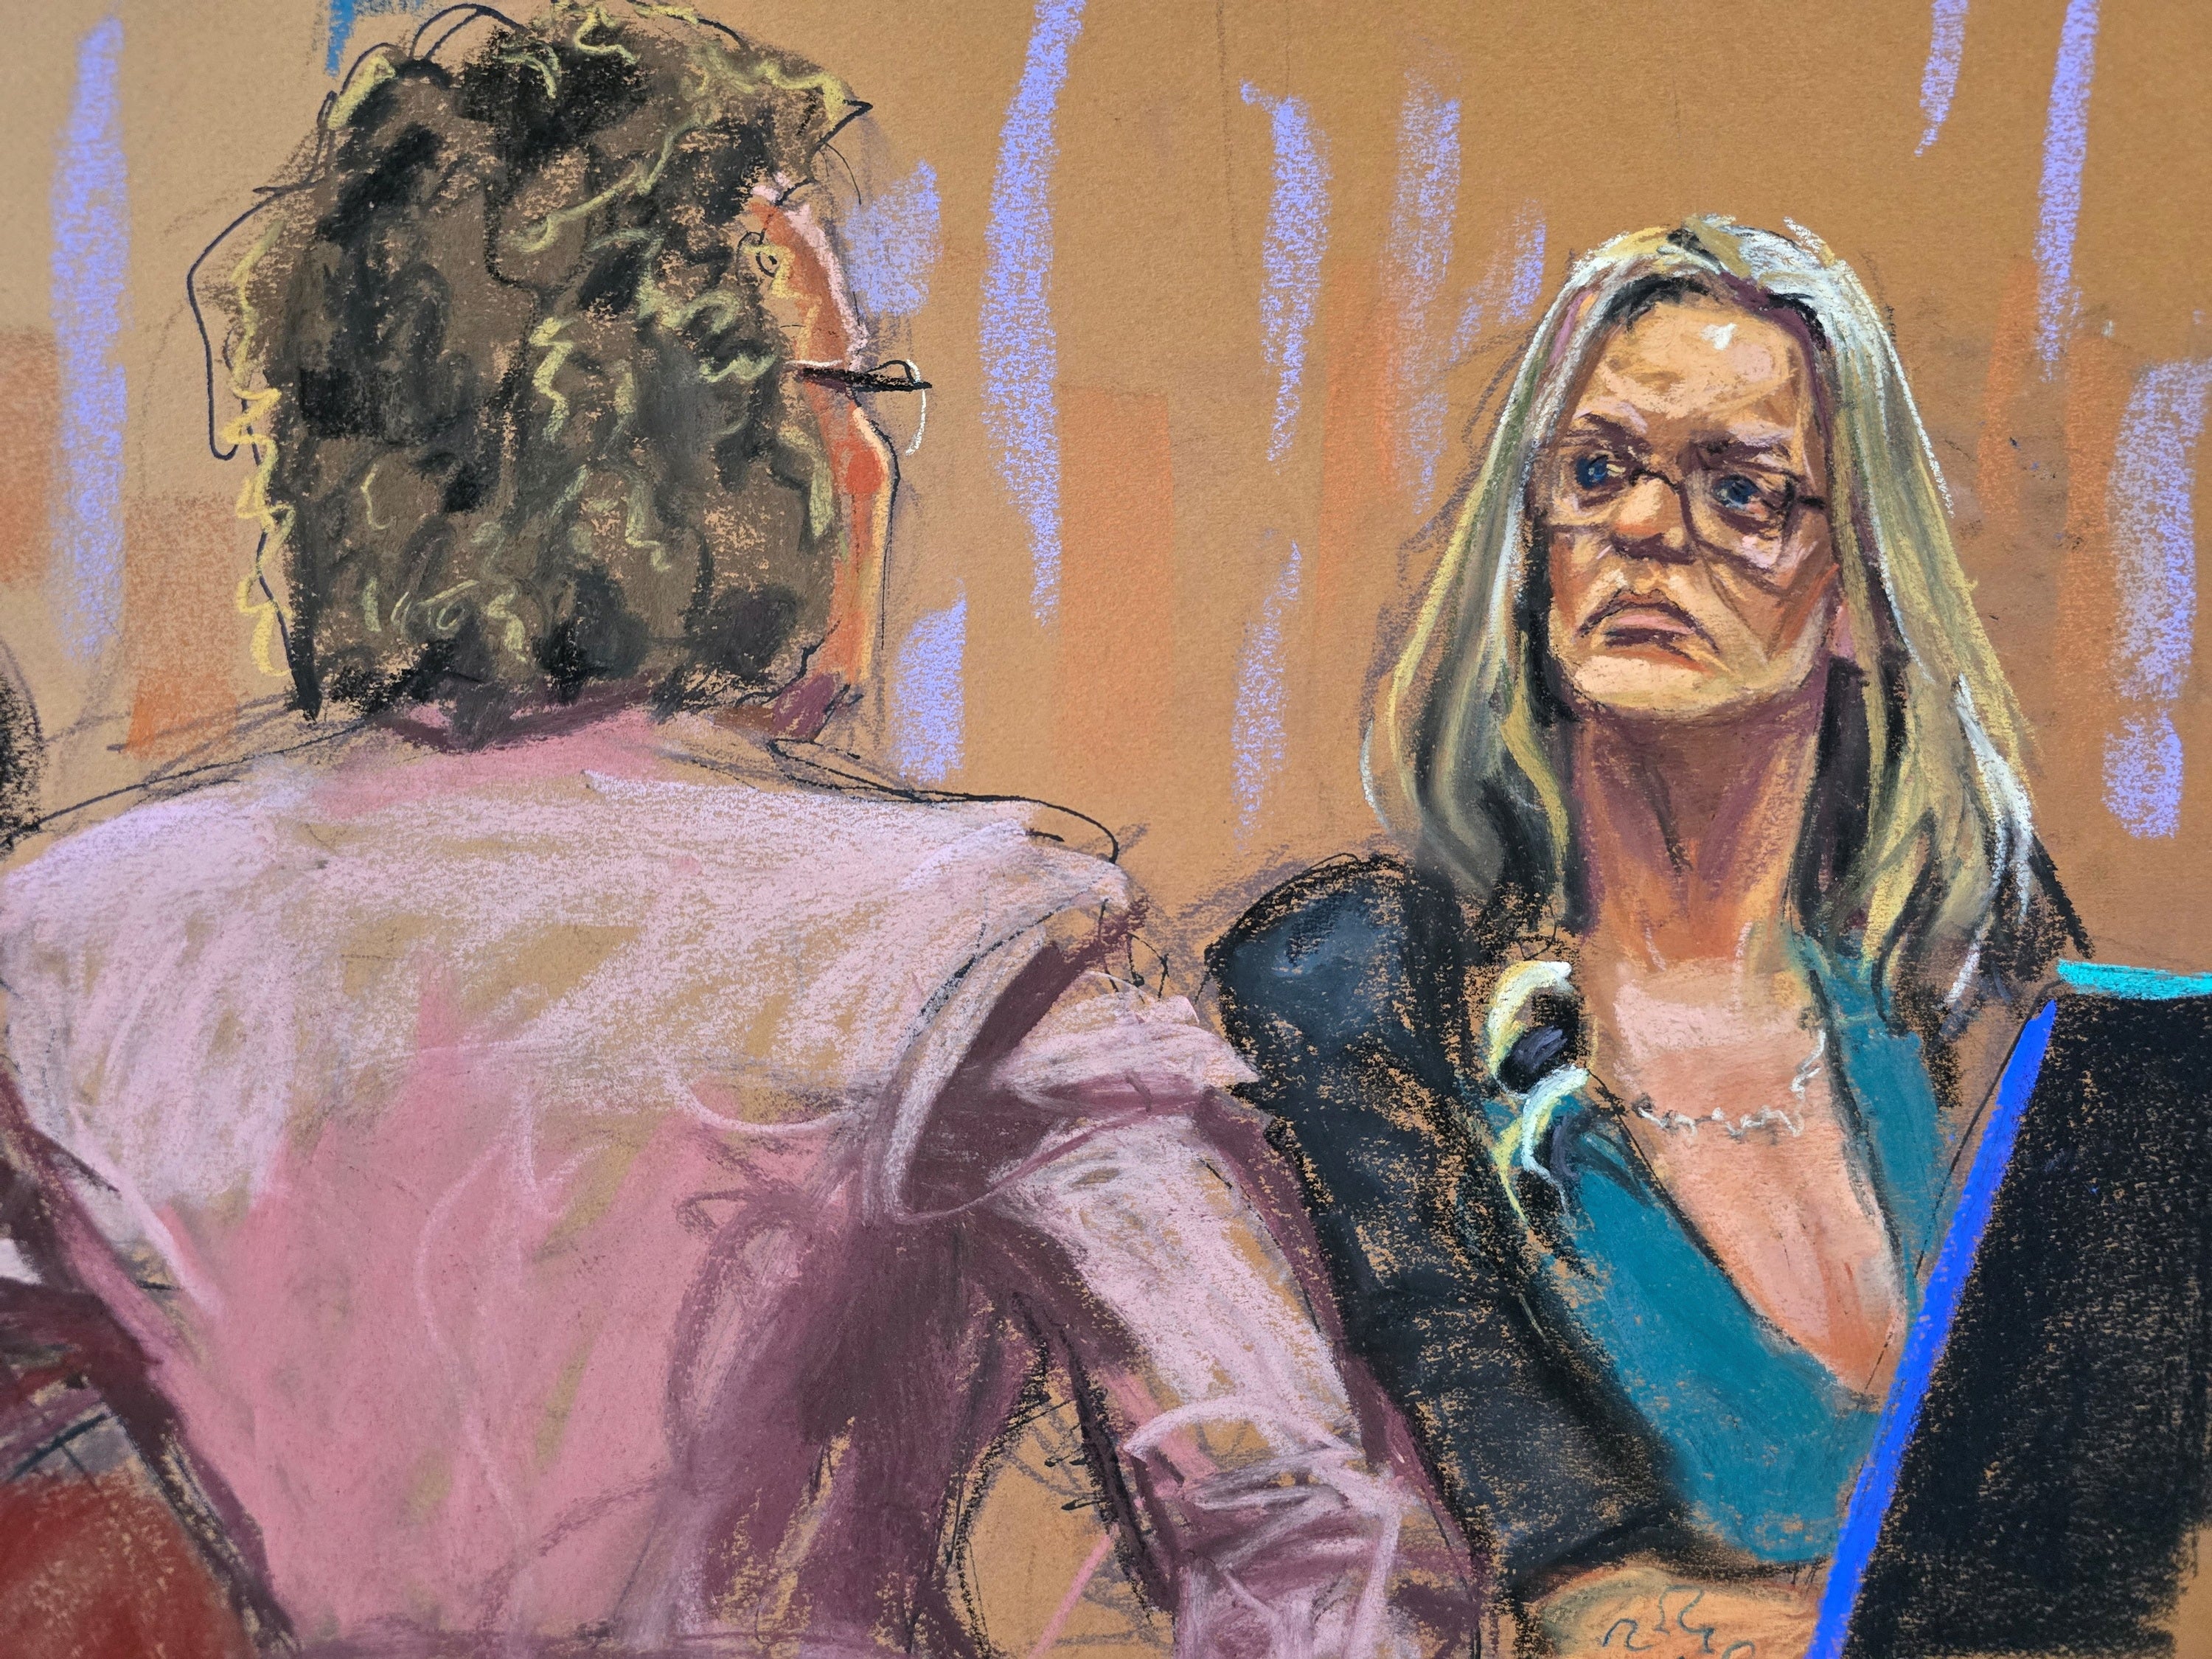 Stormy Daniels testifies in court about her dealings with Donald Trump, first brought to the public’s attention by the lawyer she parted ways with five years ago